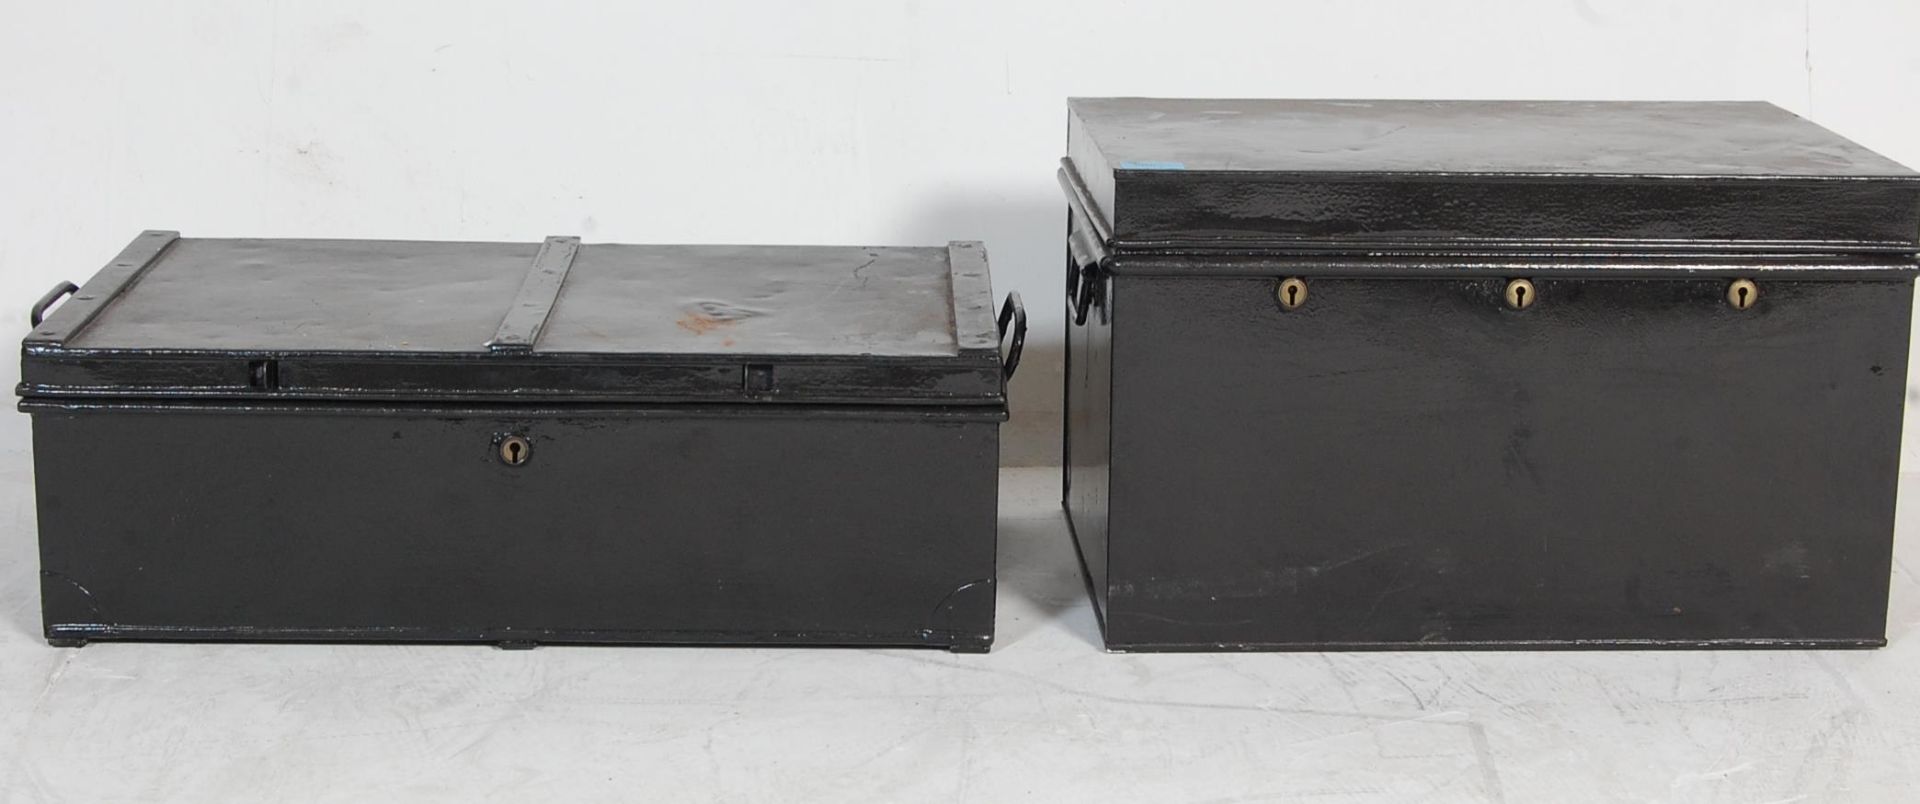 TWO EARLY 20TH CENTURY METAL SHIPPING TRUNKS